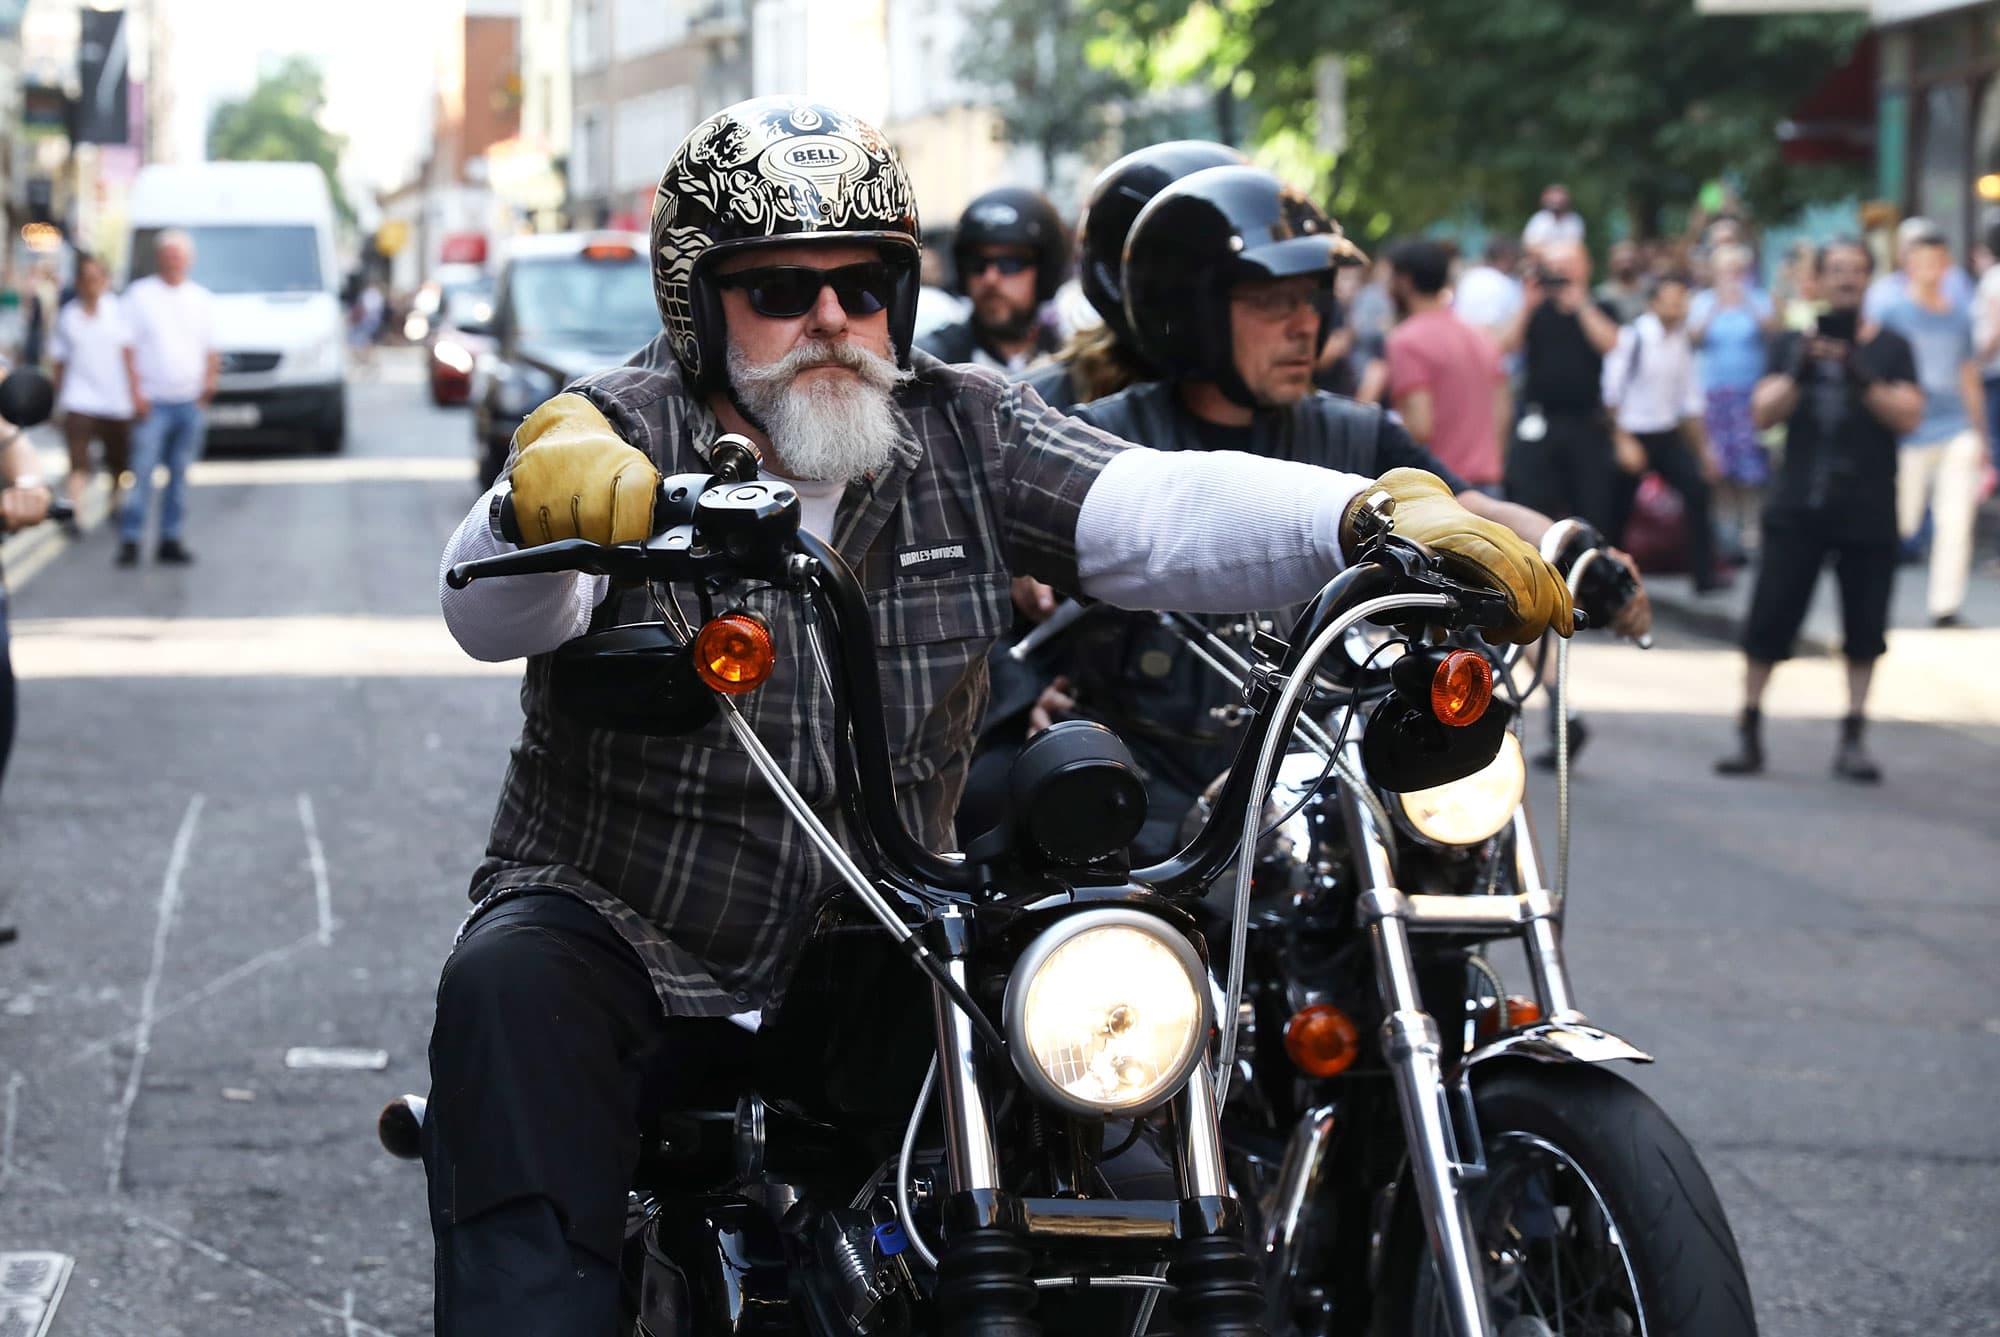 Harley Davidson Owners: The Ultimate Coolness Factor!